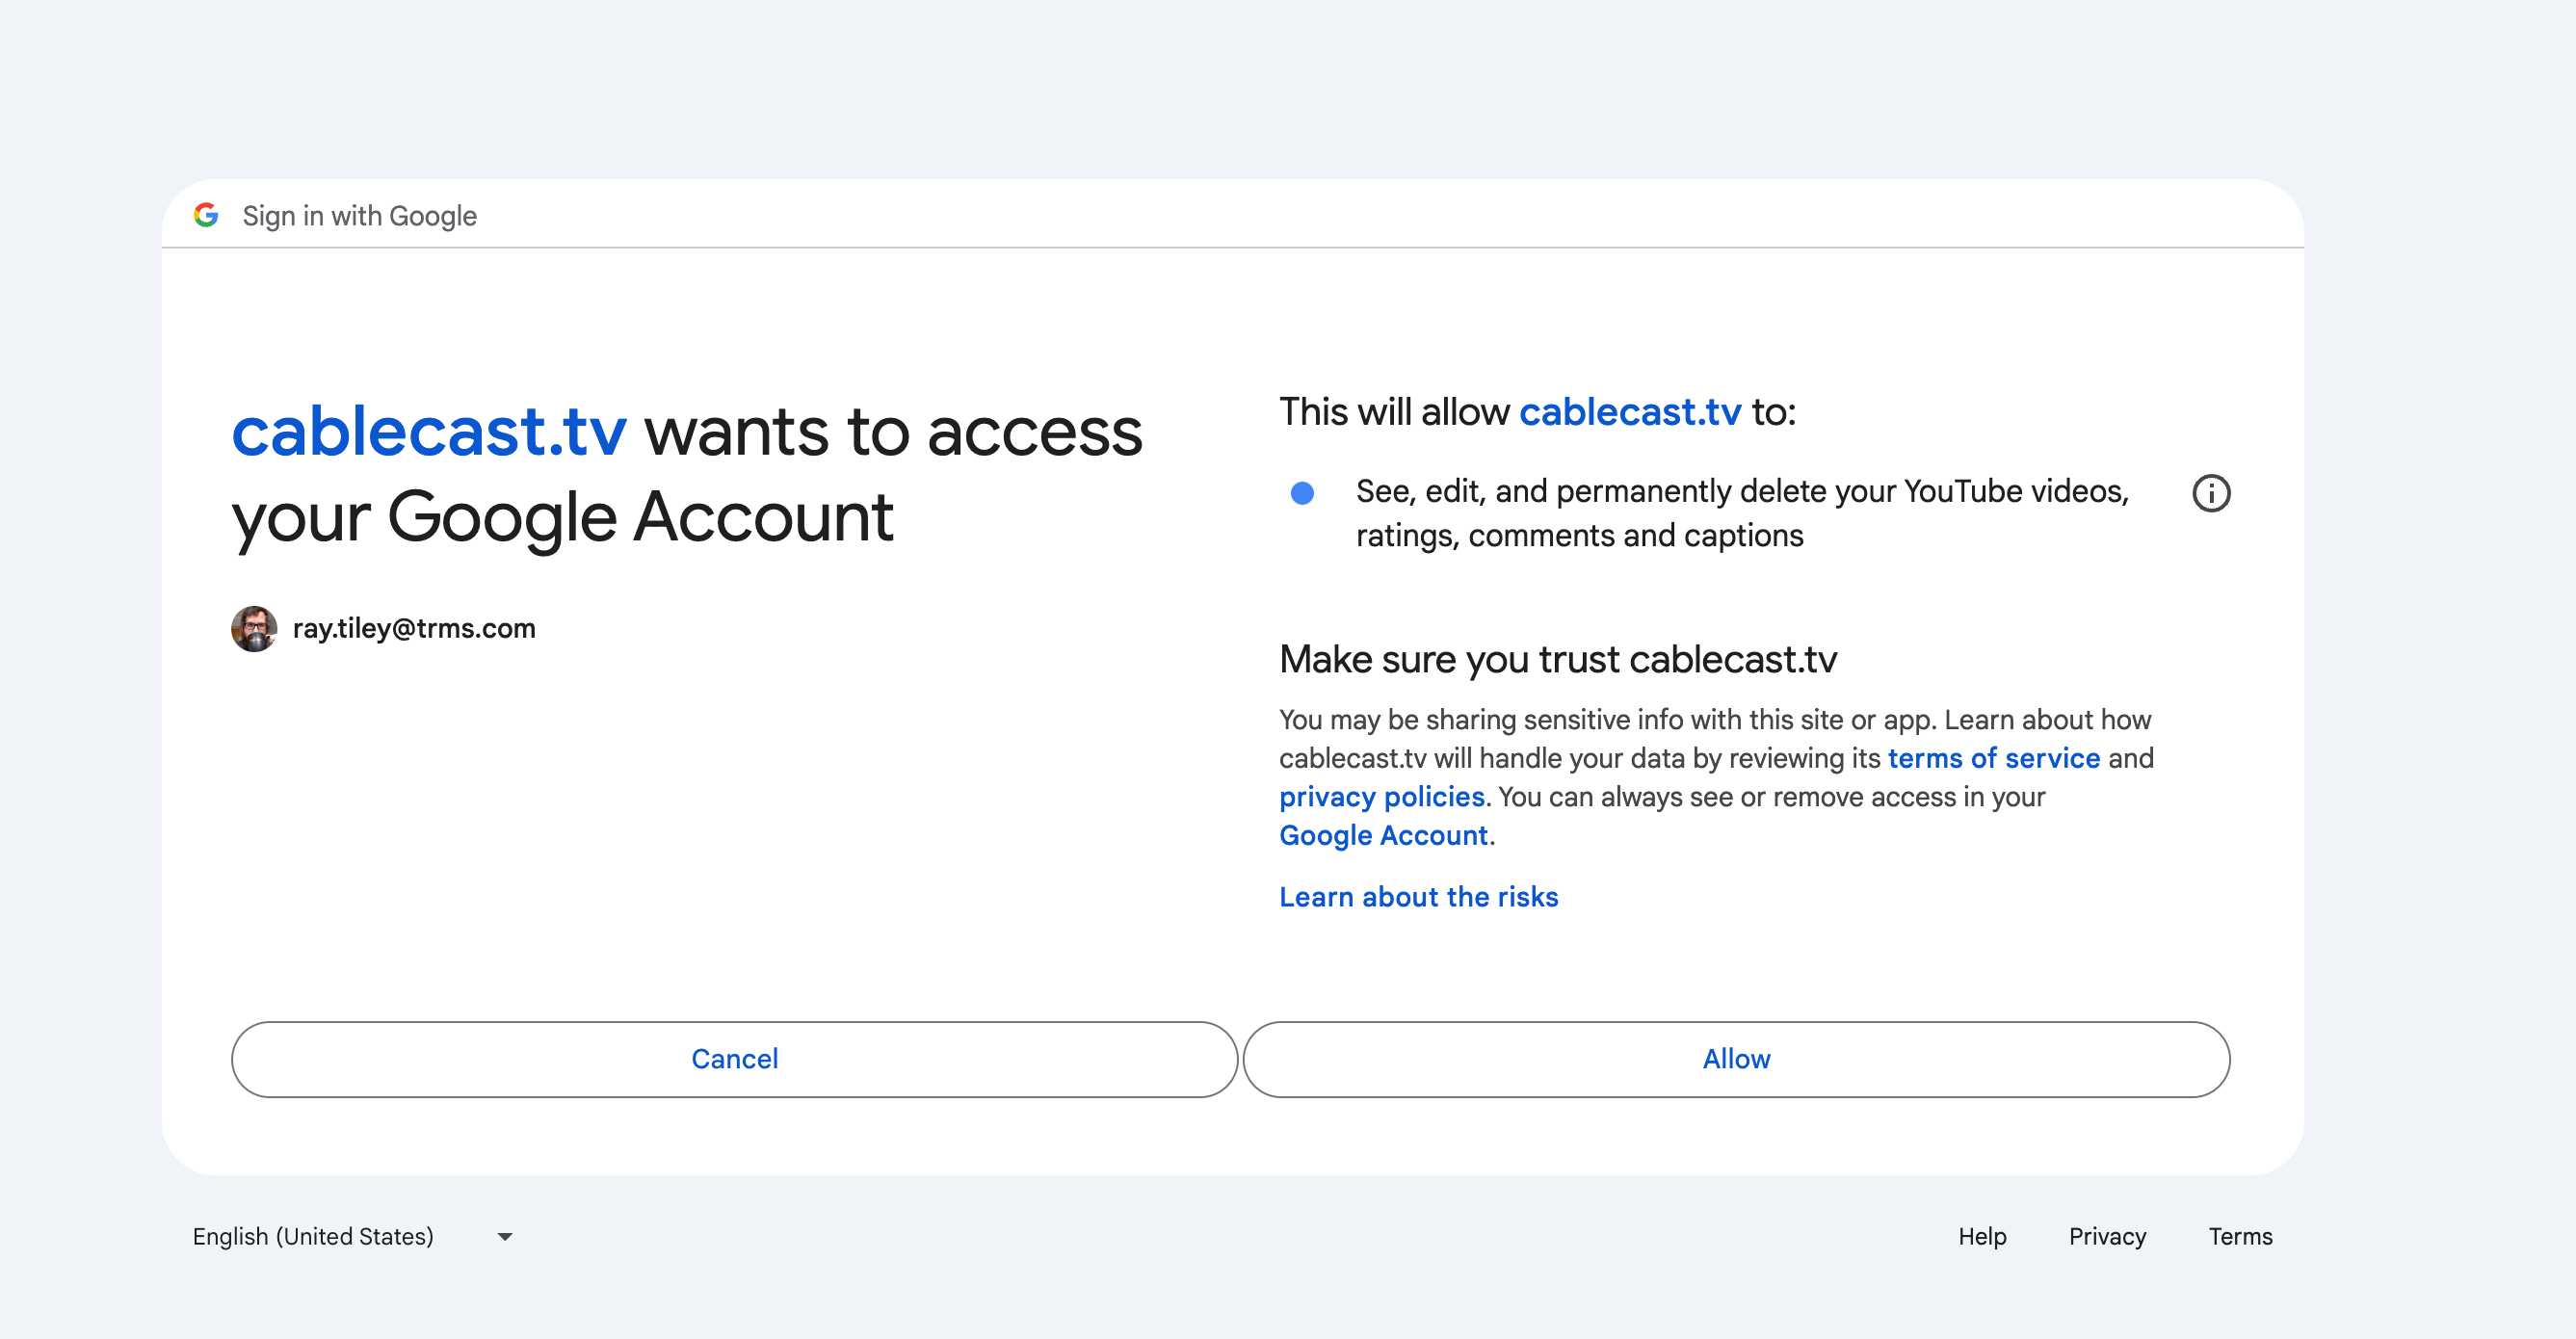 Allow cablecast.tv access to your google account.